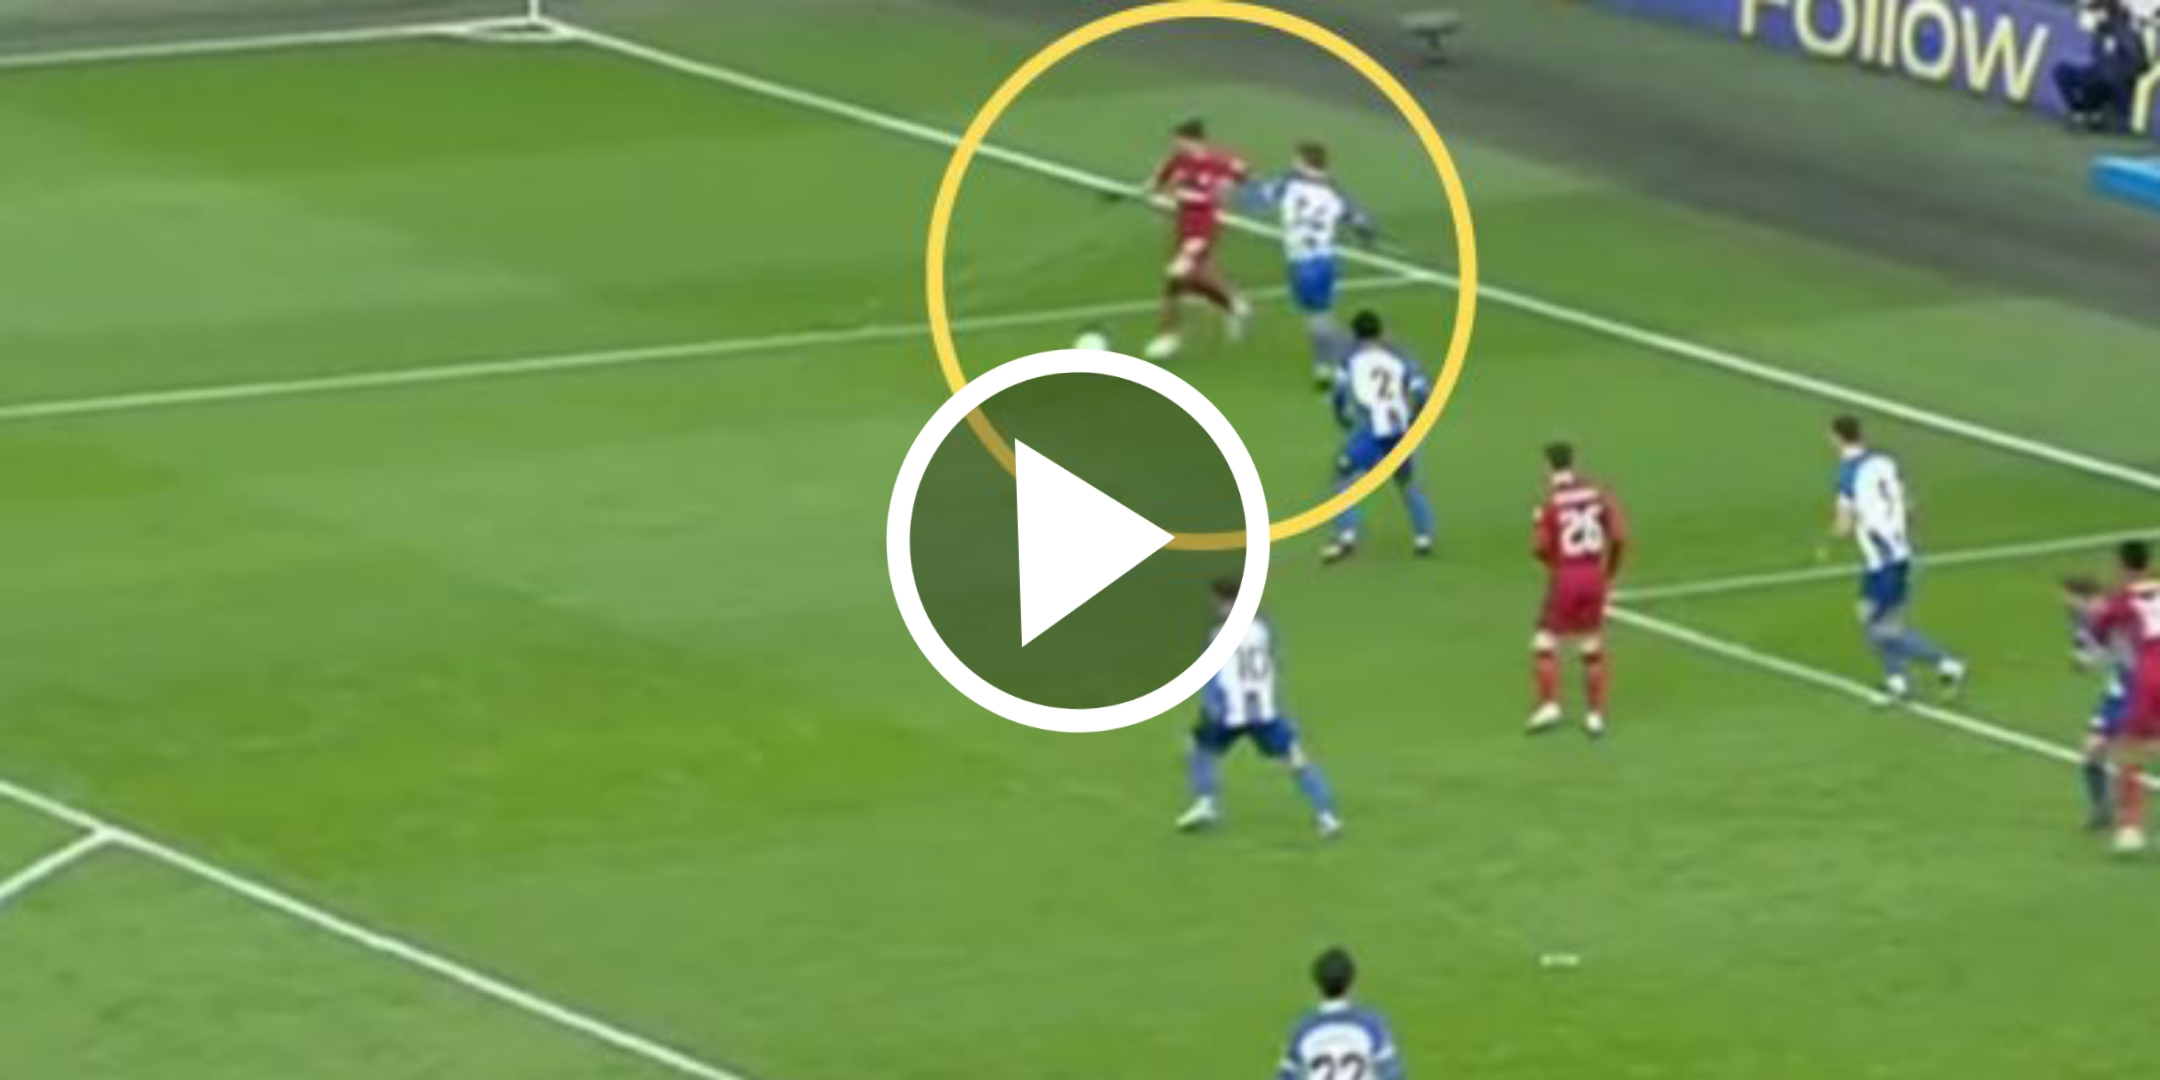 (Video) Watch Darwin Nunez’s Brighton highlights as the Uruguayan impresses and continues his return from injury 9 Sportelo